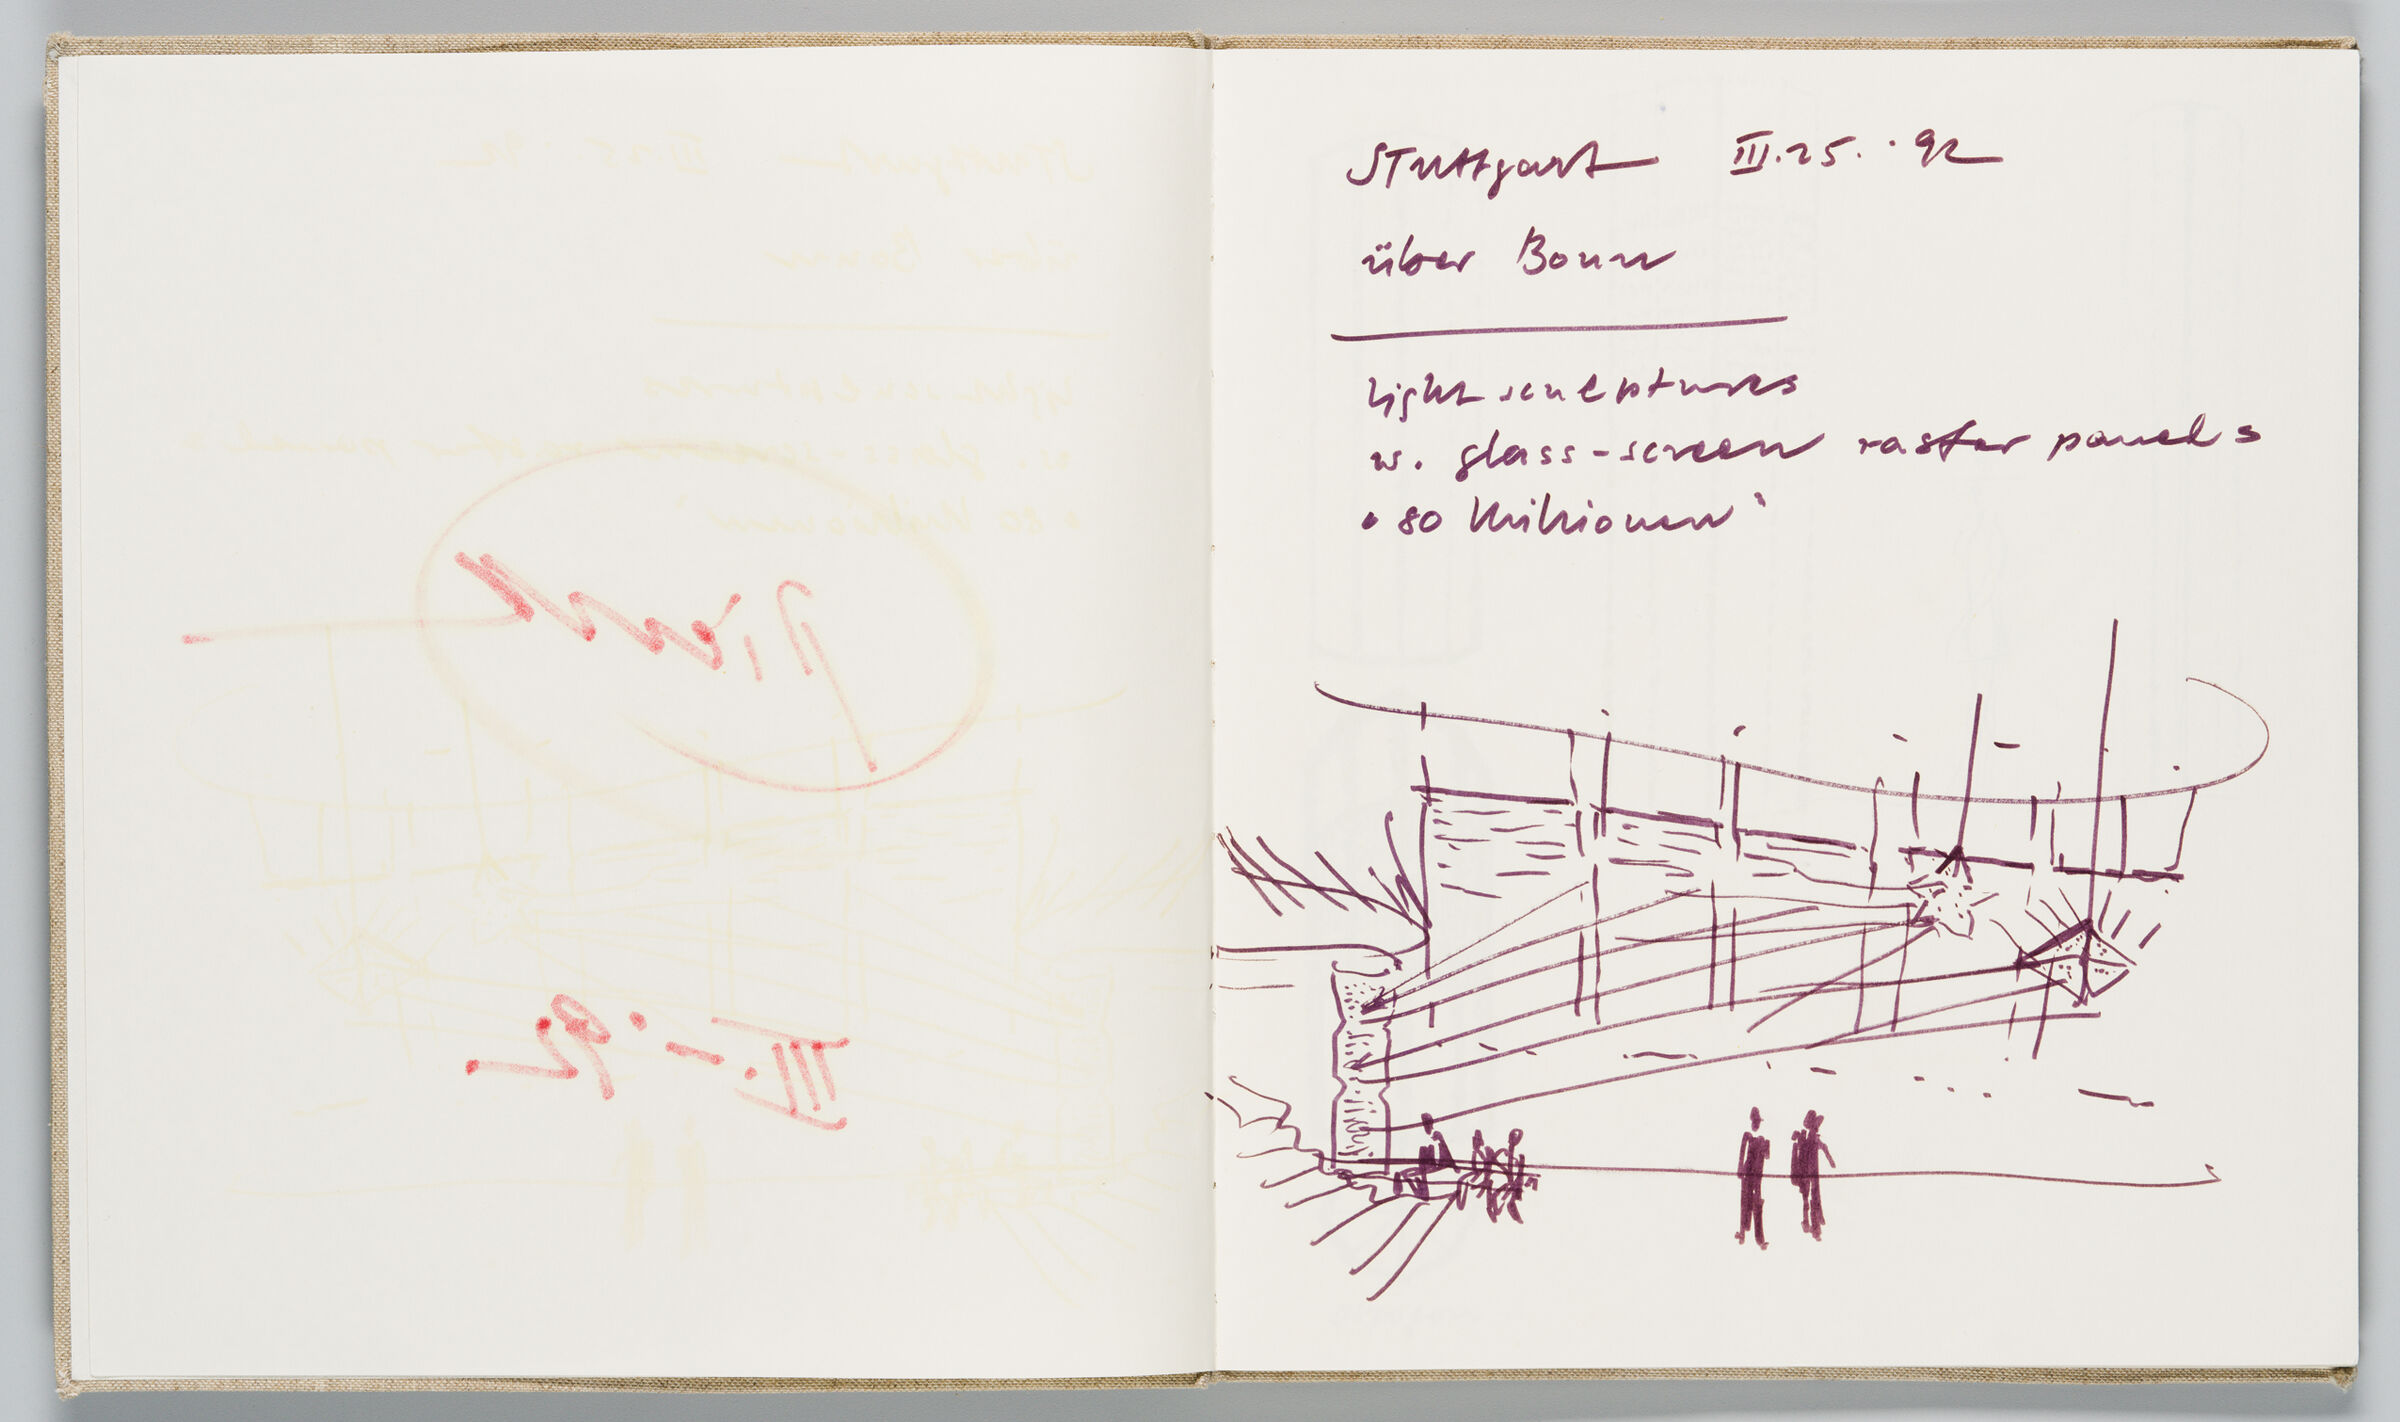 Untitled (Bleed-Through Of Previous Page With Color Transfer, Left Page); Untitled (Design For Installation Of Light Sculptures, Right Page)